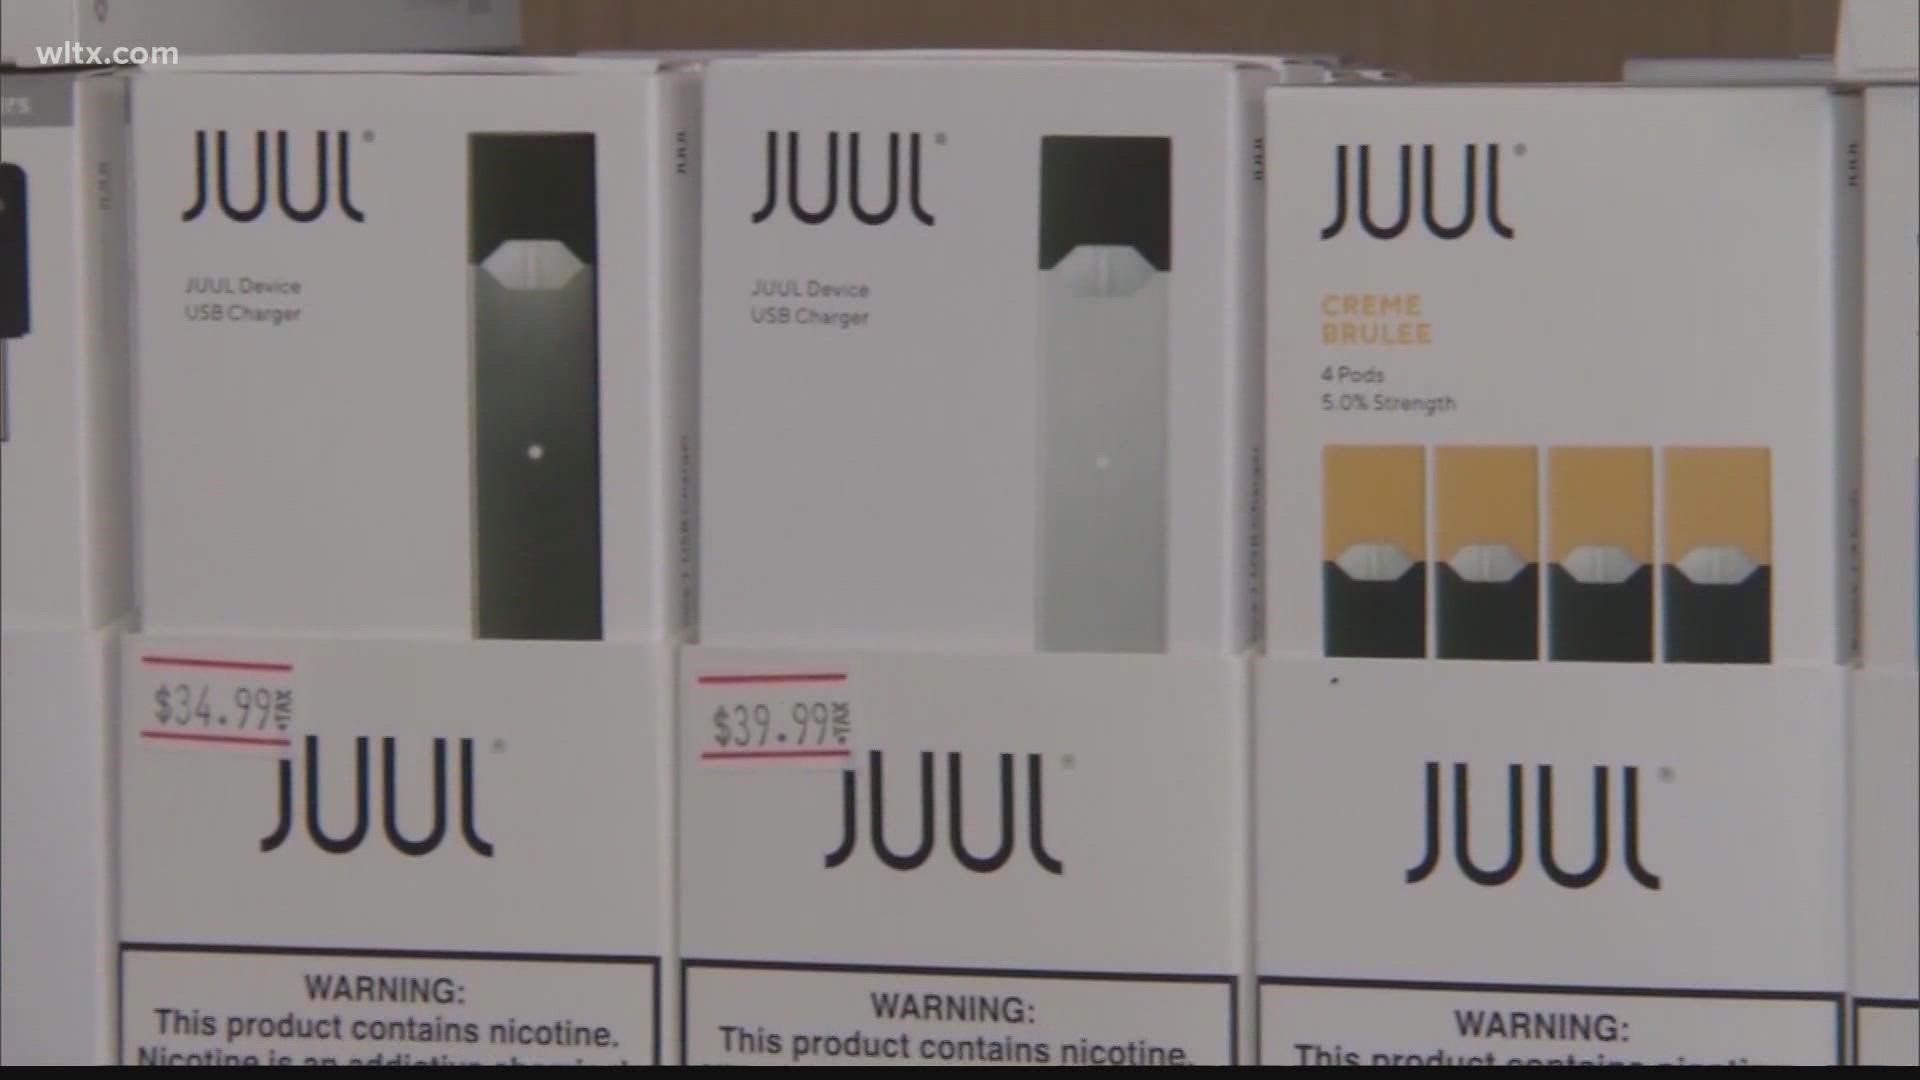 Juul can continue to sell its electronic cigarettes, at least for now, after a federal appeals court on Friday temporarily blocked a government ban.